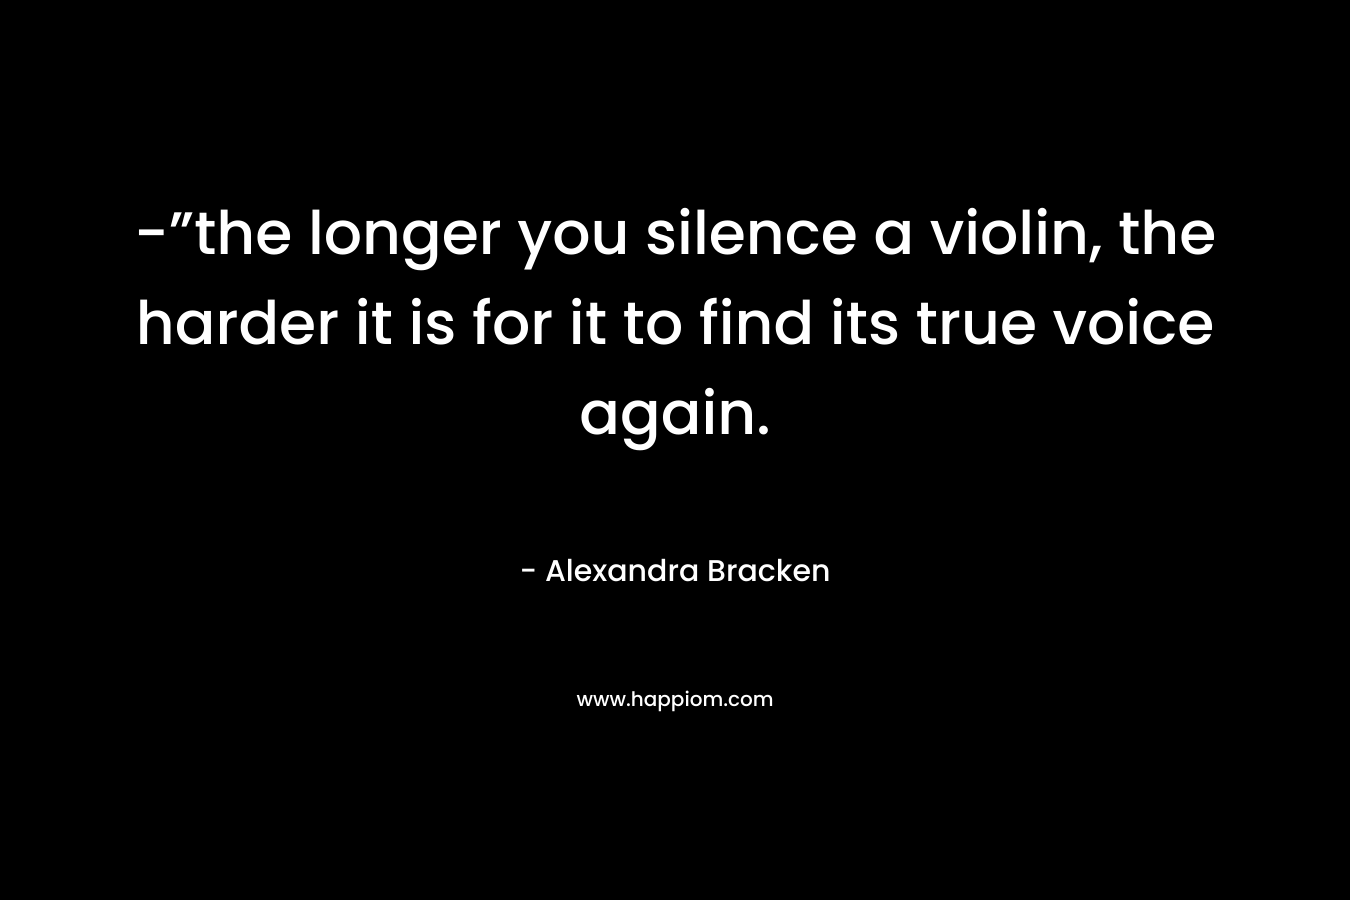 -”the longer you silence a violin, the harder it is for it to find its true voice again. – Alexandra Bracken